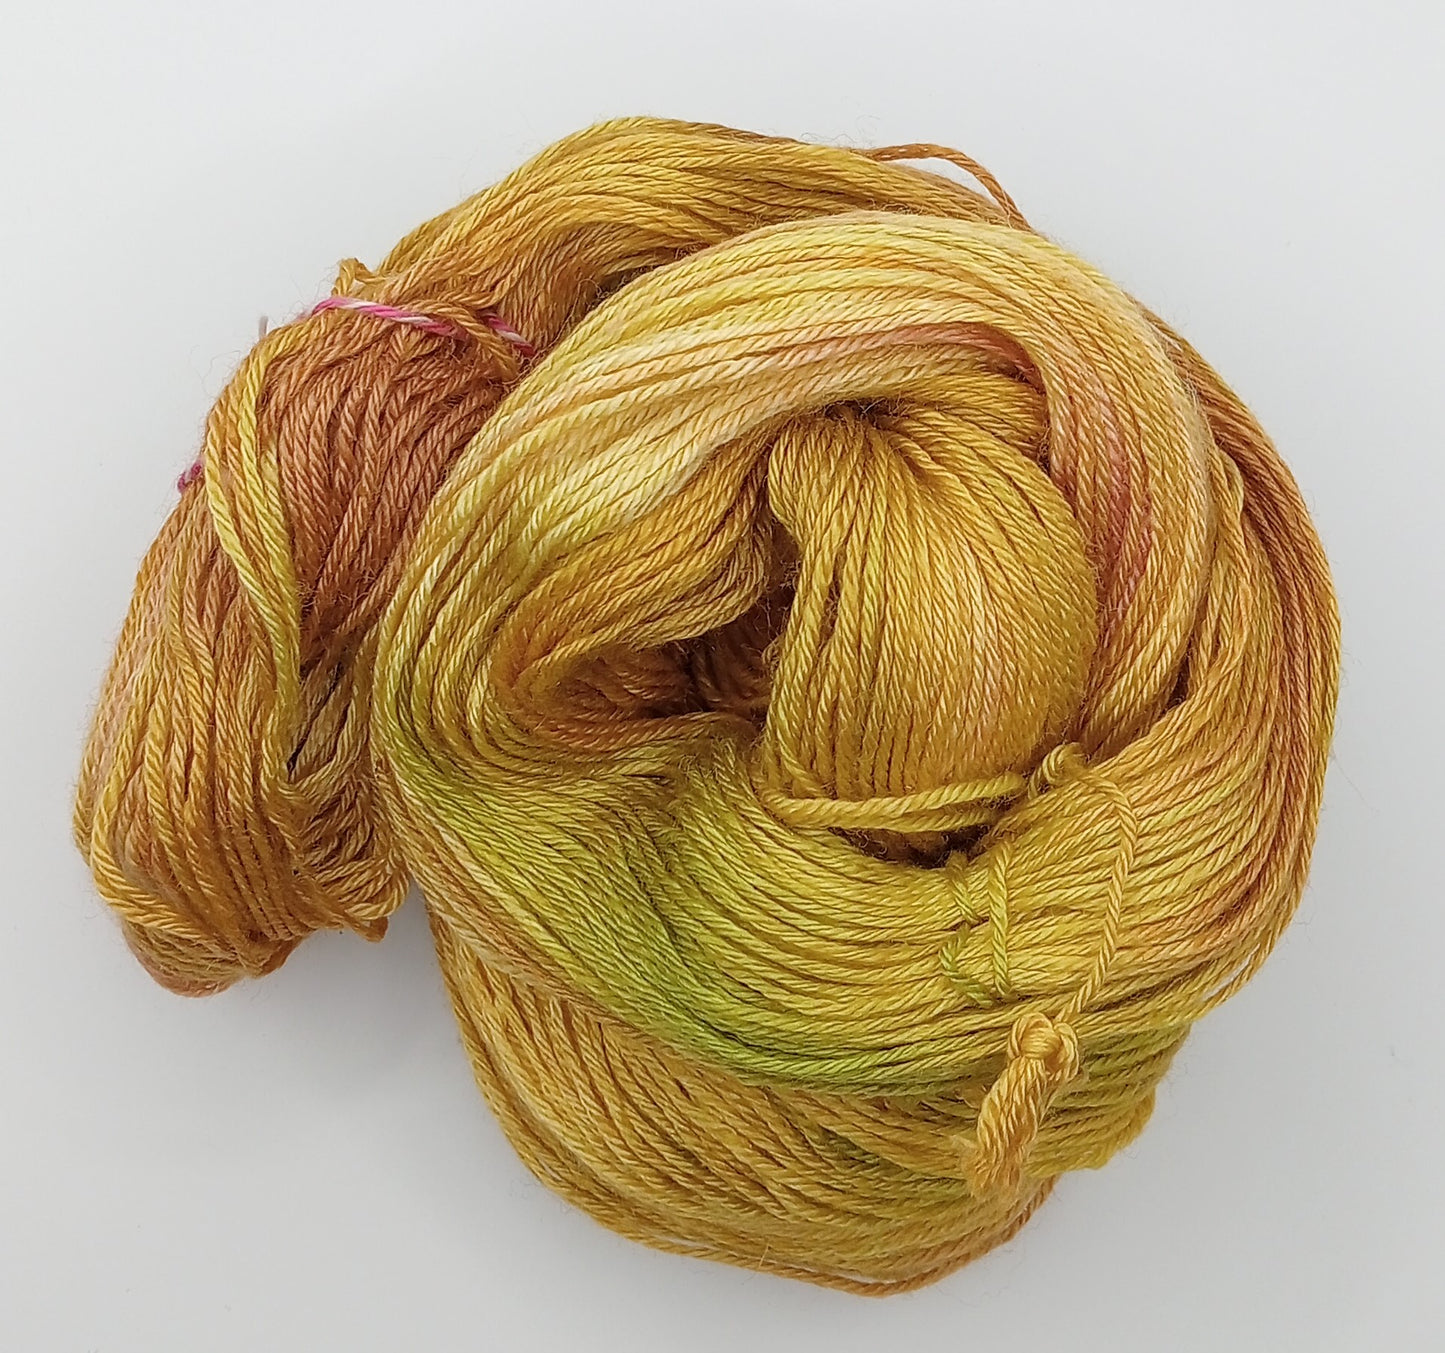 100G Bluefaced Leicester/Silk hand dyed 4 ply Yarn- "Pistachio"